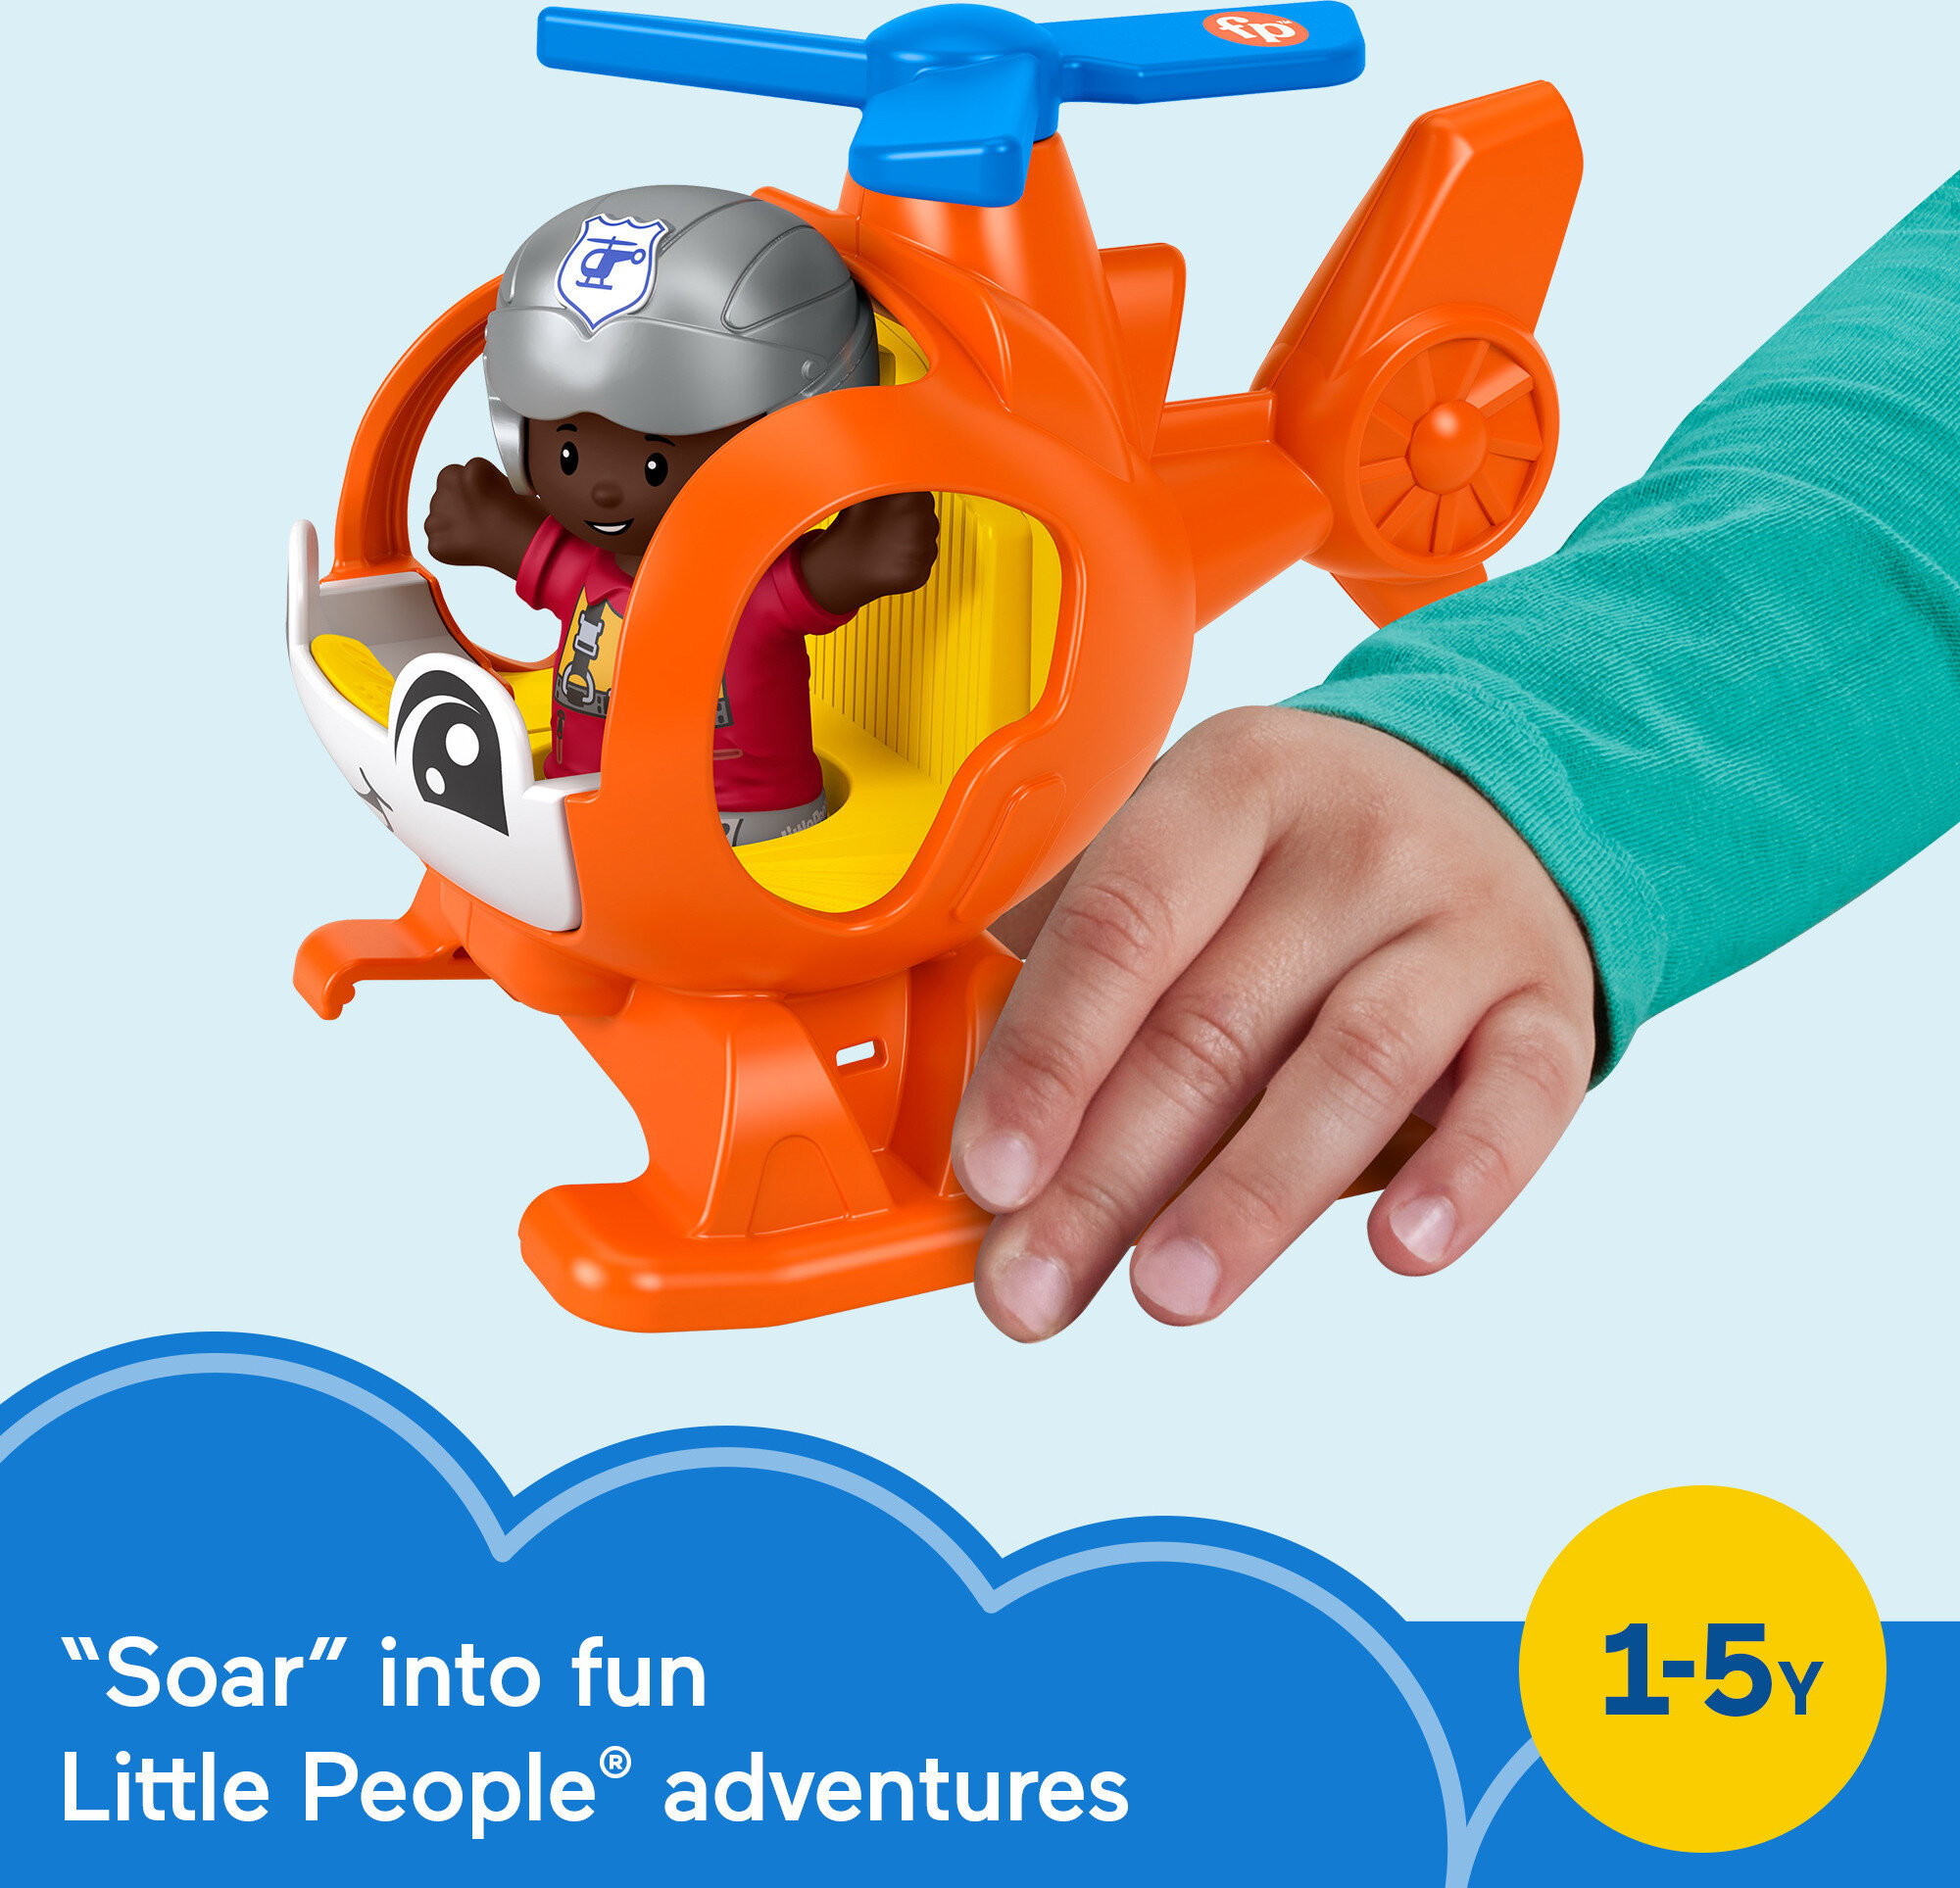 Fisher-Price Little People Helicopter Toy & Pilot Figure Set for Toddlers, 2 Pieces - image 2 of 6